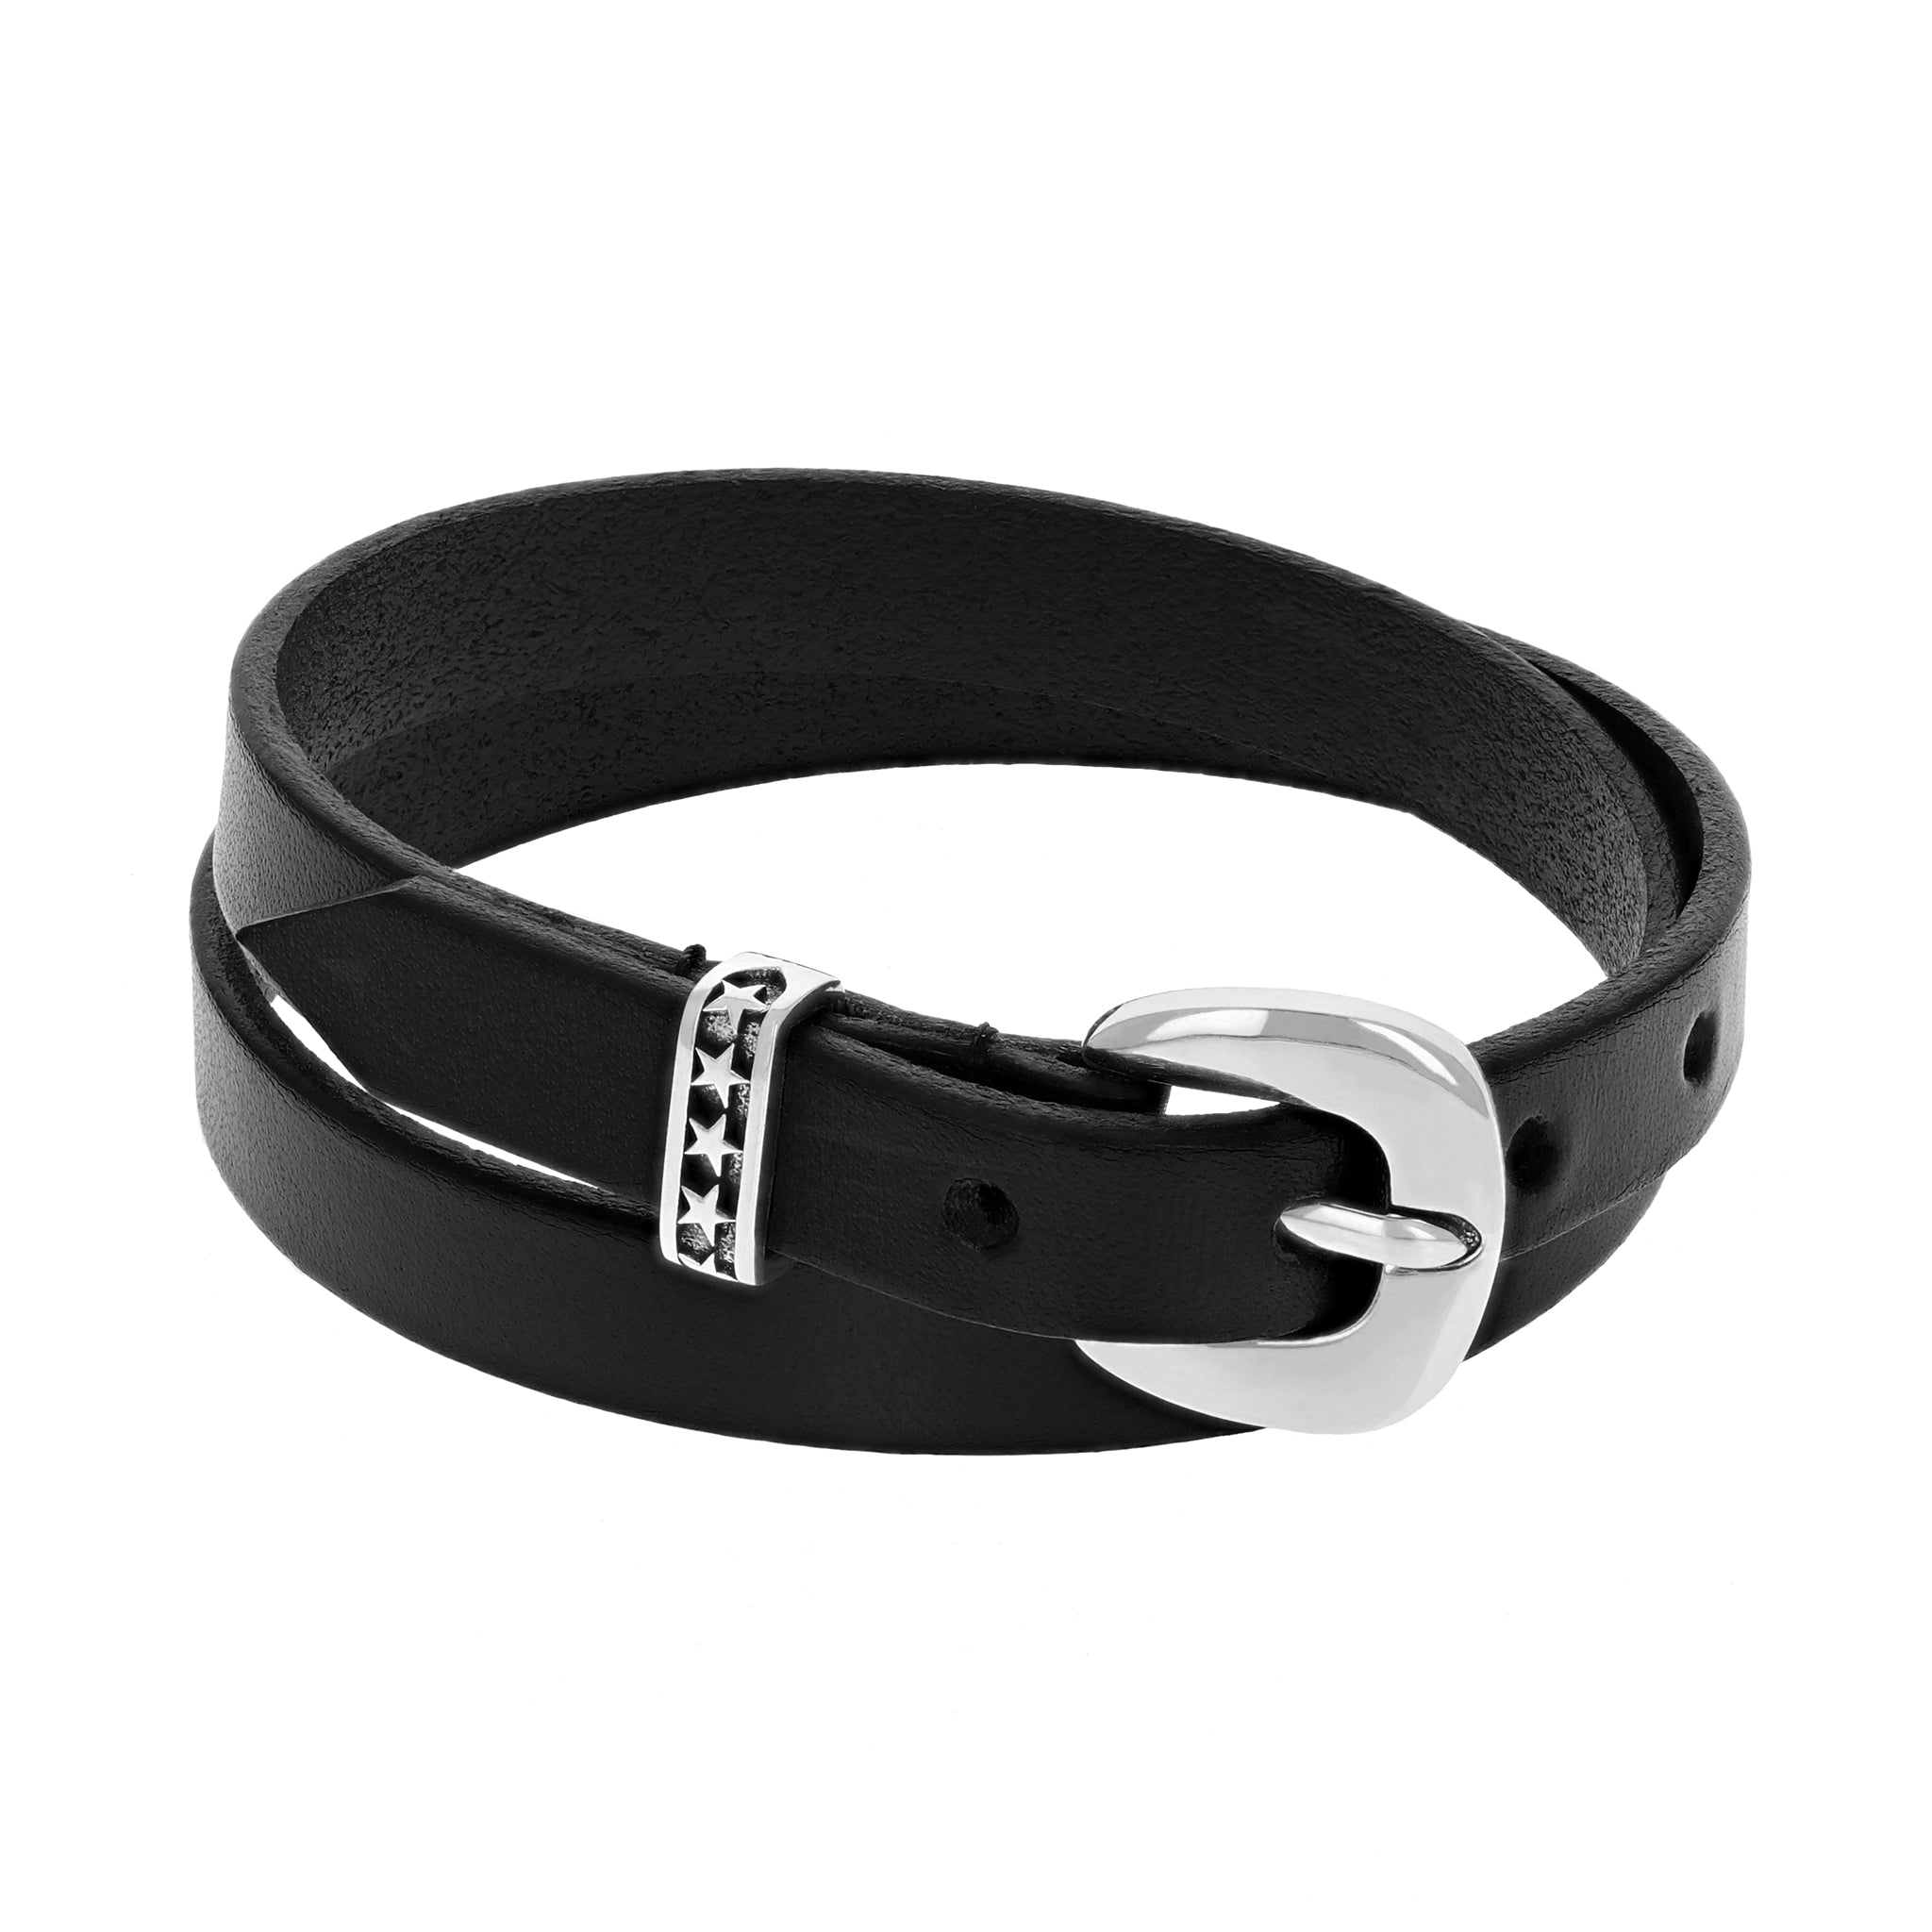 Black Double Wrap Leather Bracelet with Buckle and Stars on the Strap Keeper